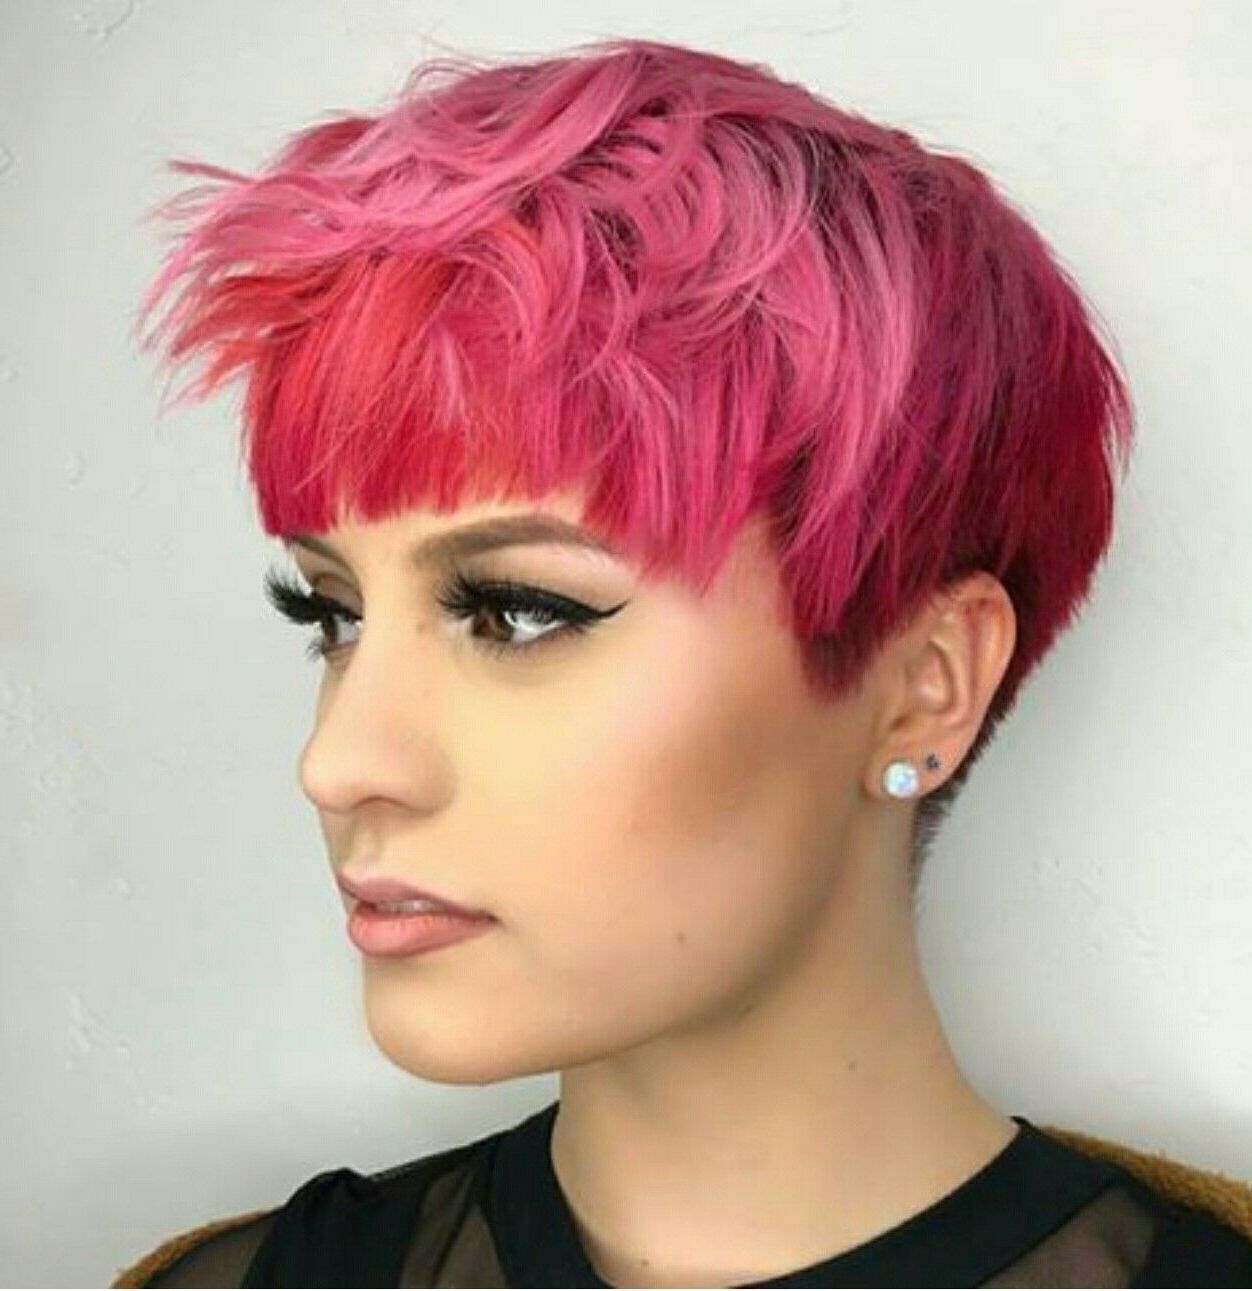 Pinmarni Christensen Levanger On Rockin Hair | Pinterest With Recent Ravishing Red Pixie Haircuts (View 10 of 15)